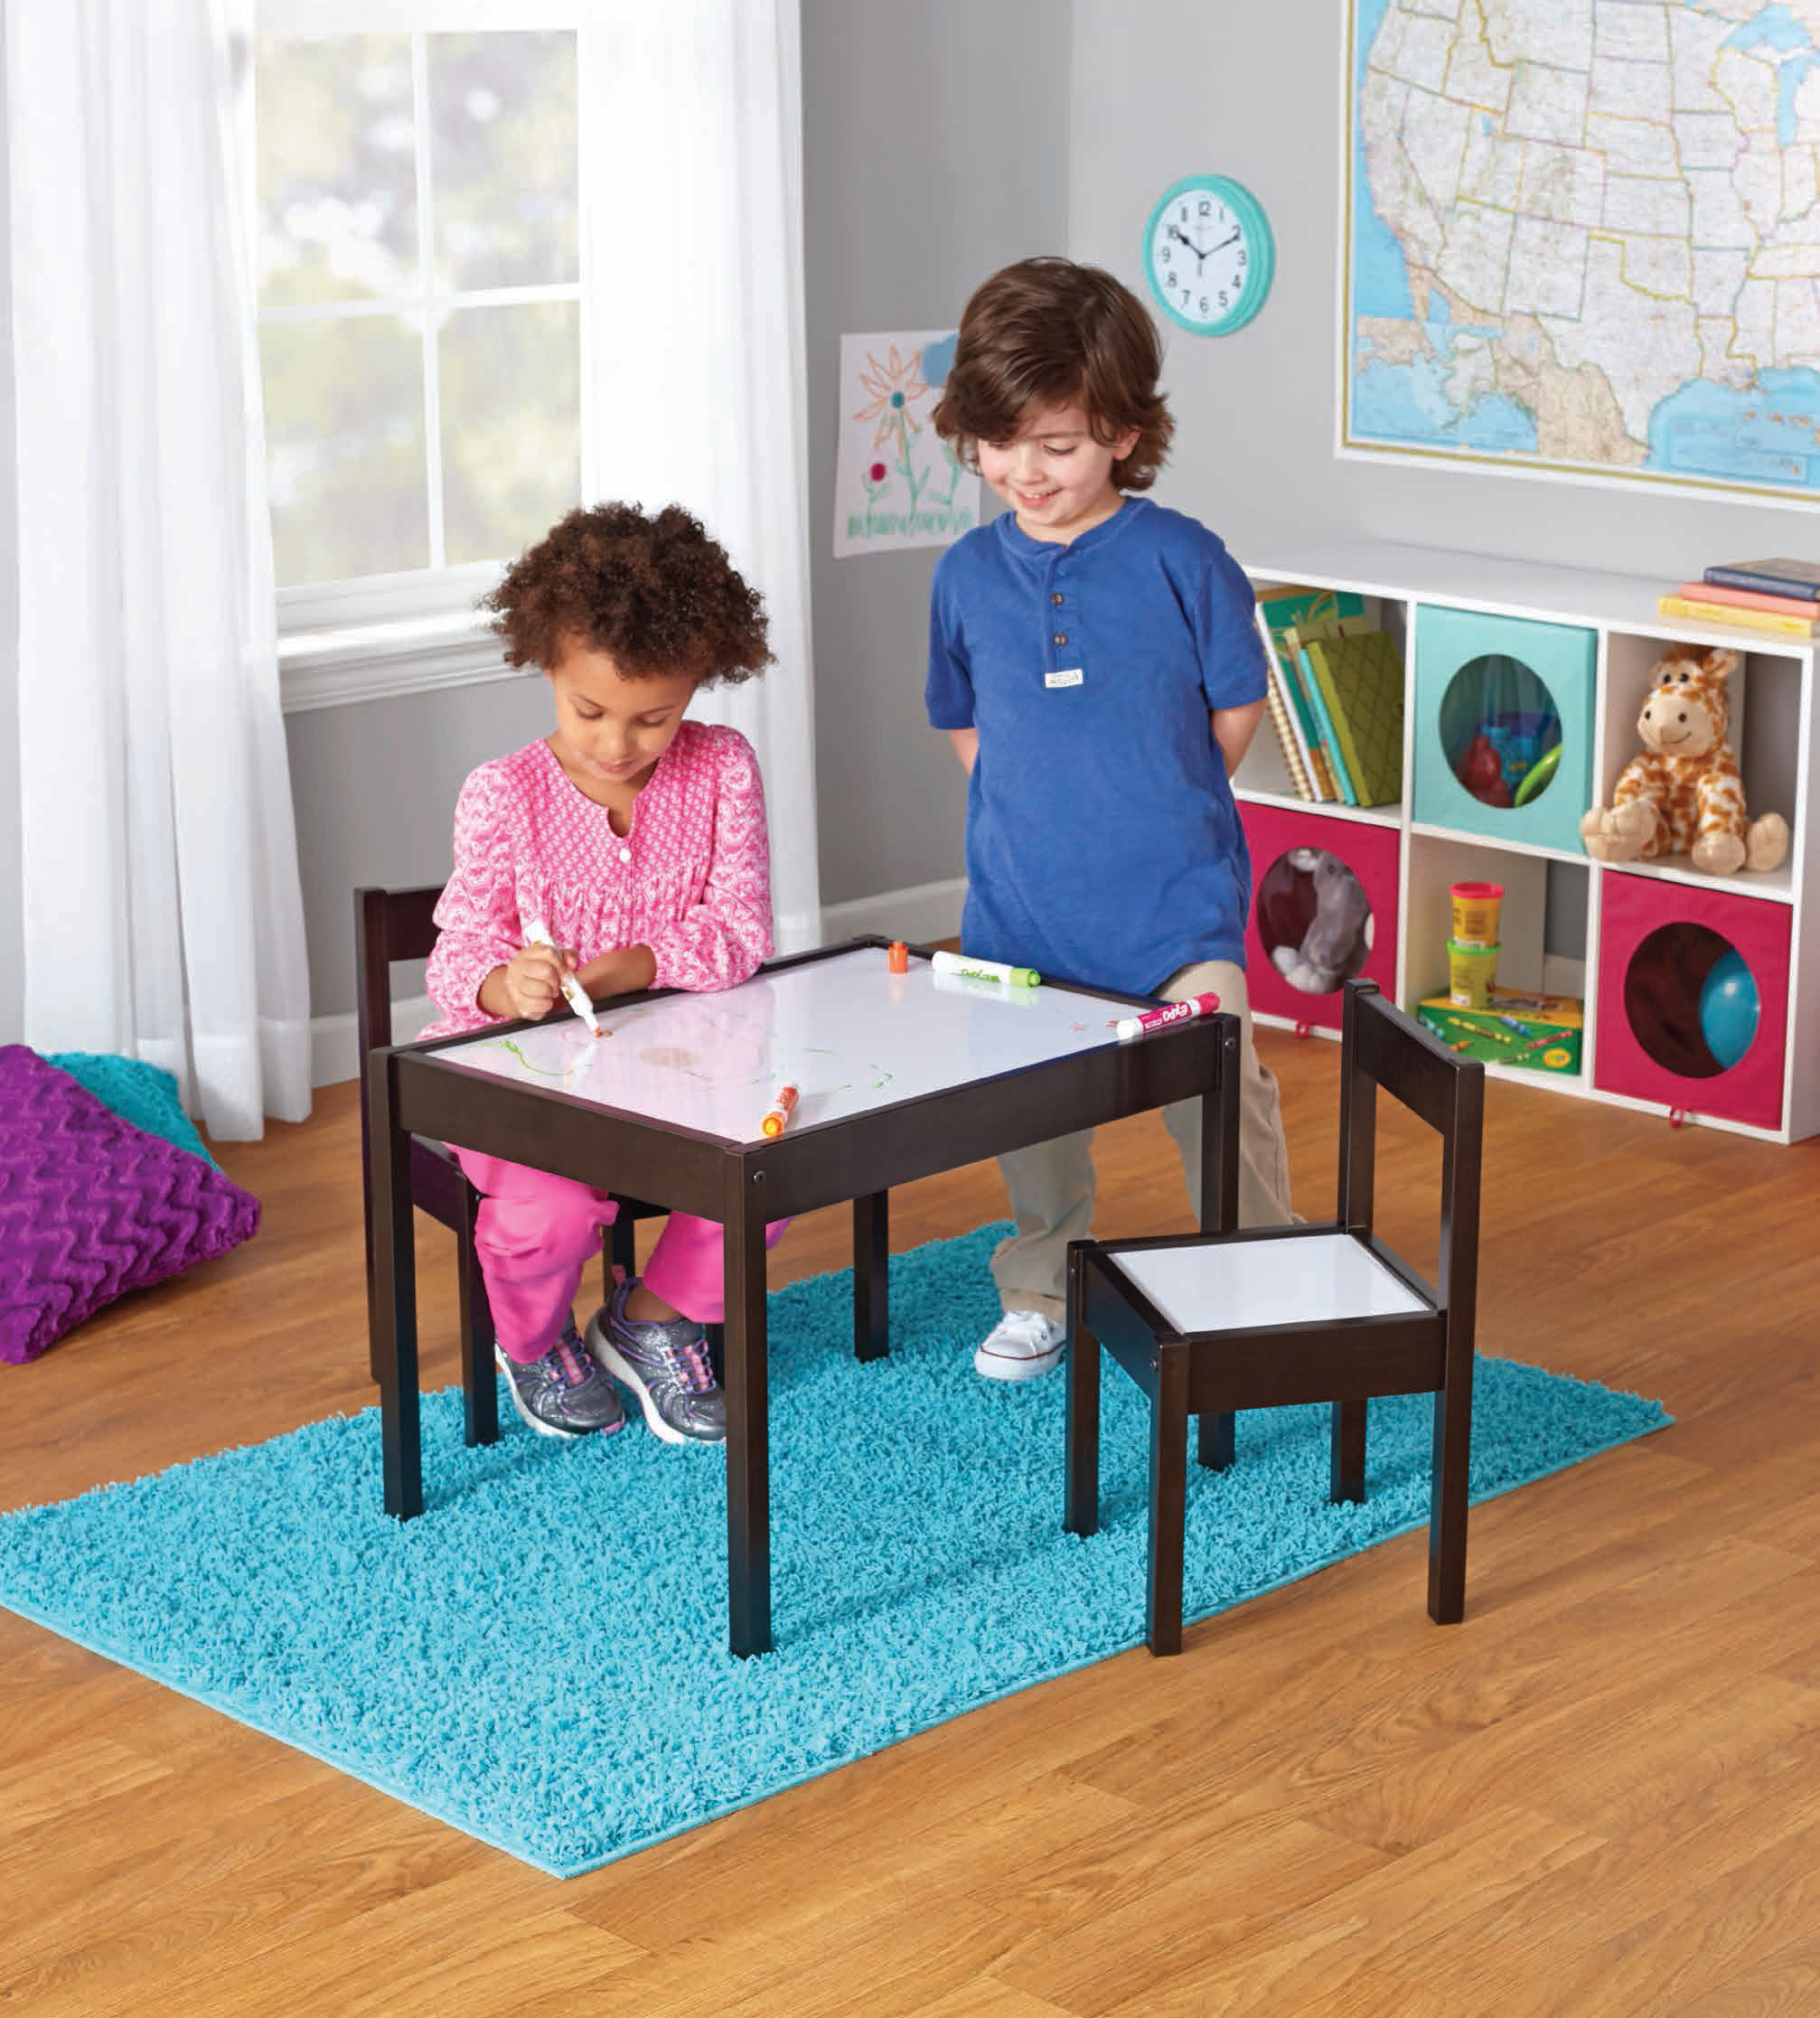 Walmart Kids Table Set
 Your Zone Kids 3 Piece Dry Erase Table and Chairs Set